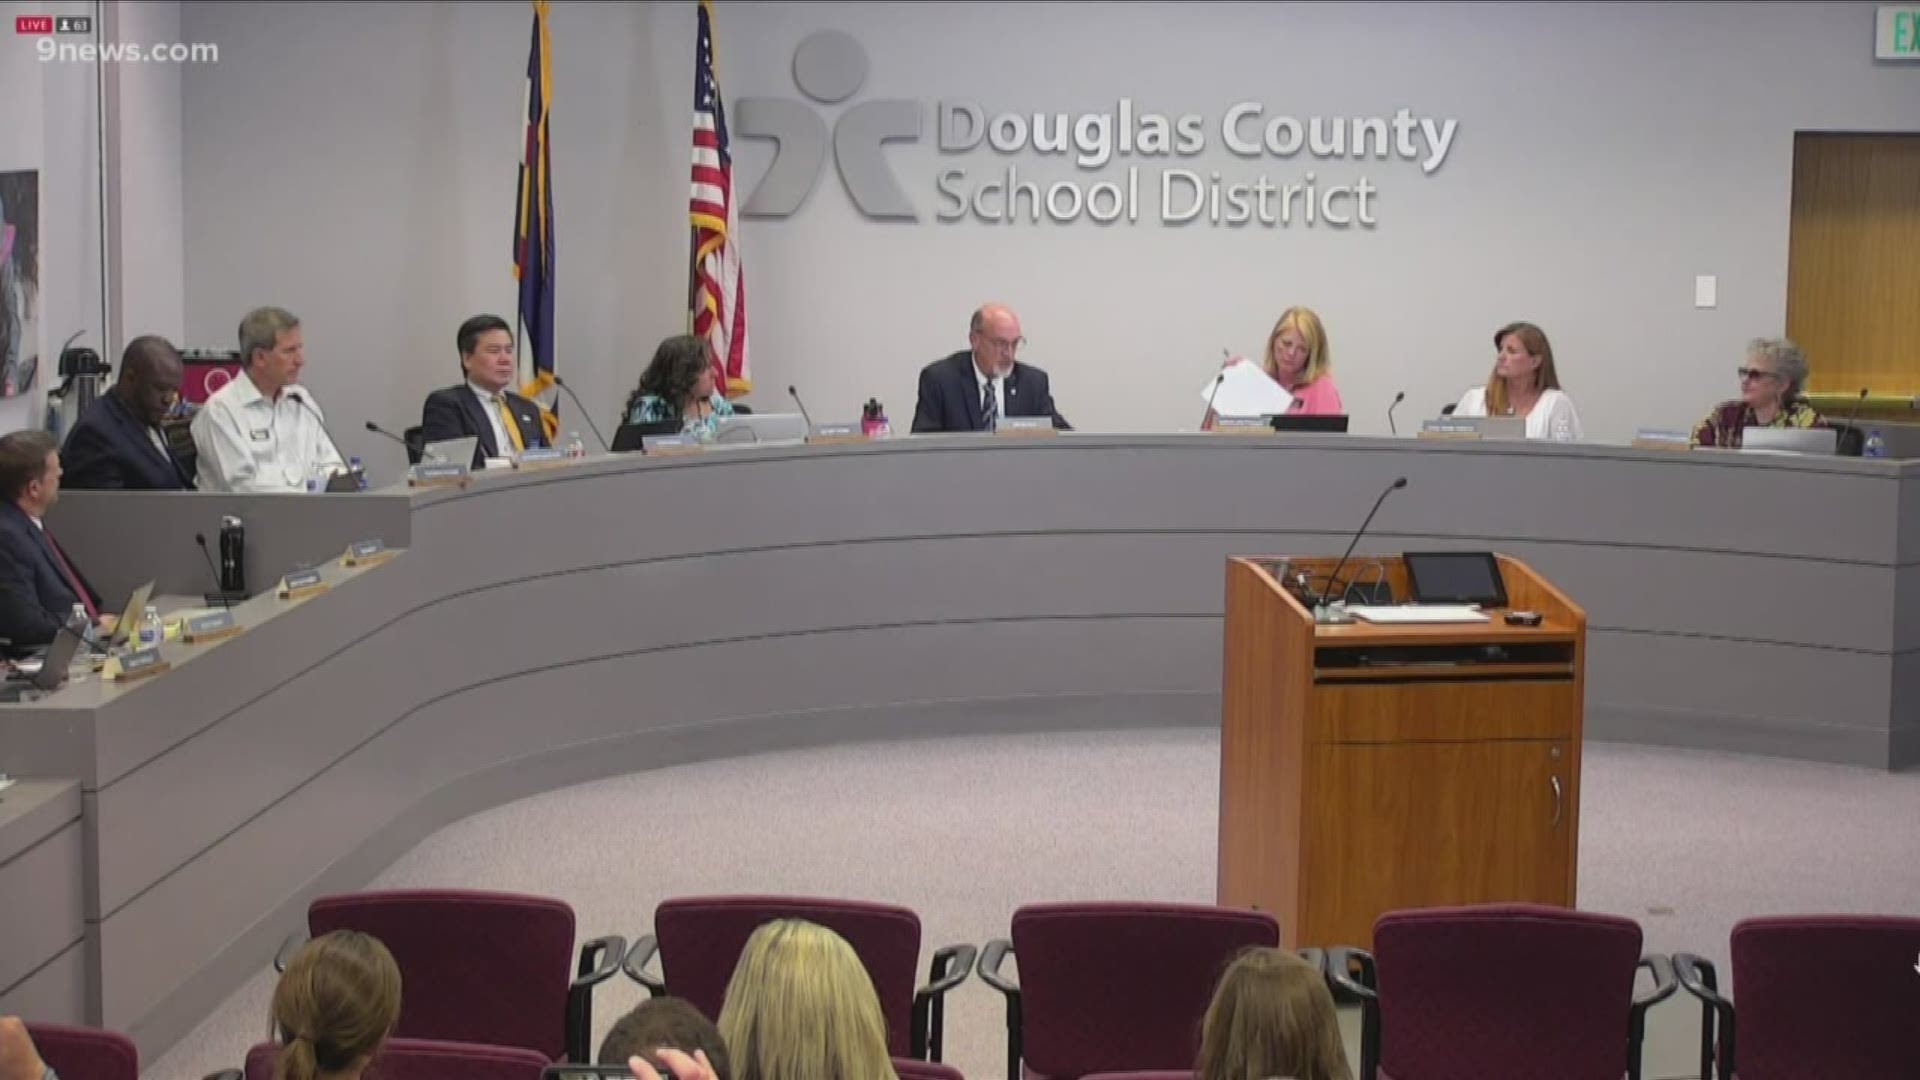 Ascent Classical Academy of Douglas County wants to arm its staff members and hopes to leave the Douglas County School District in order to allow trained staff to carry firearms.